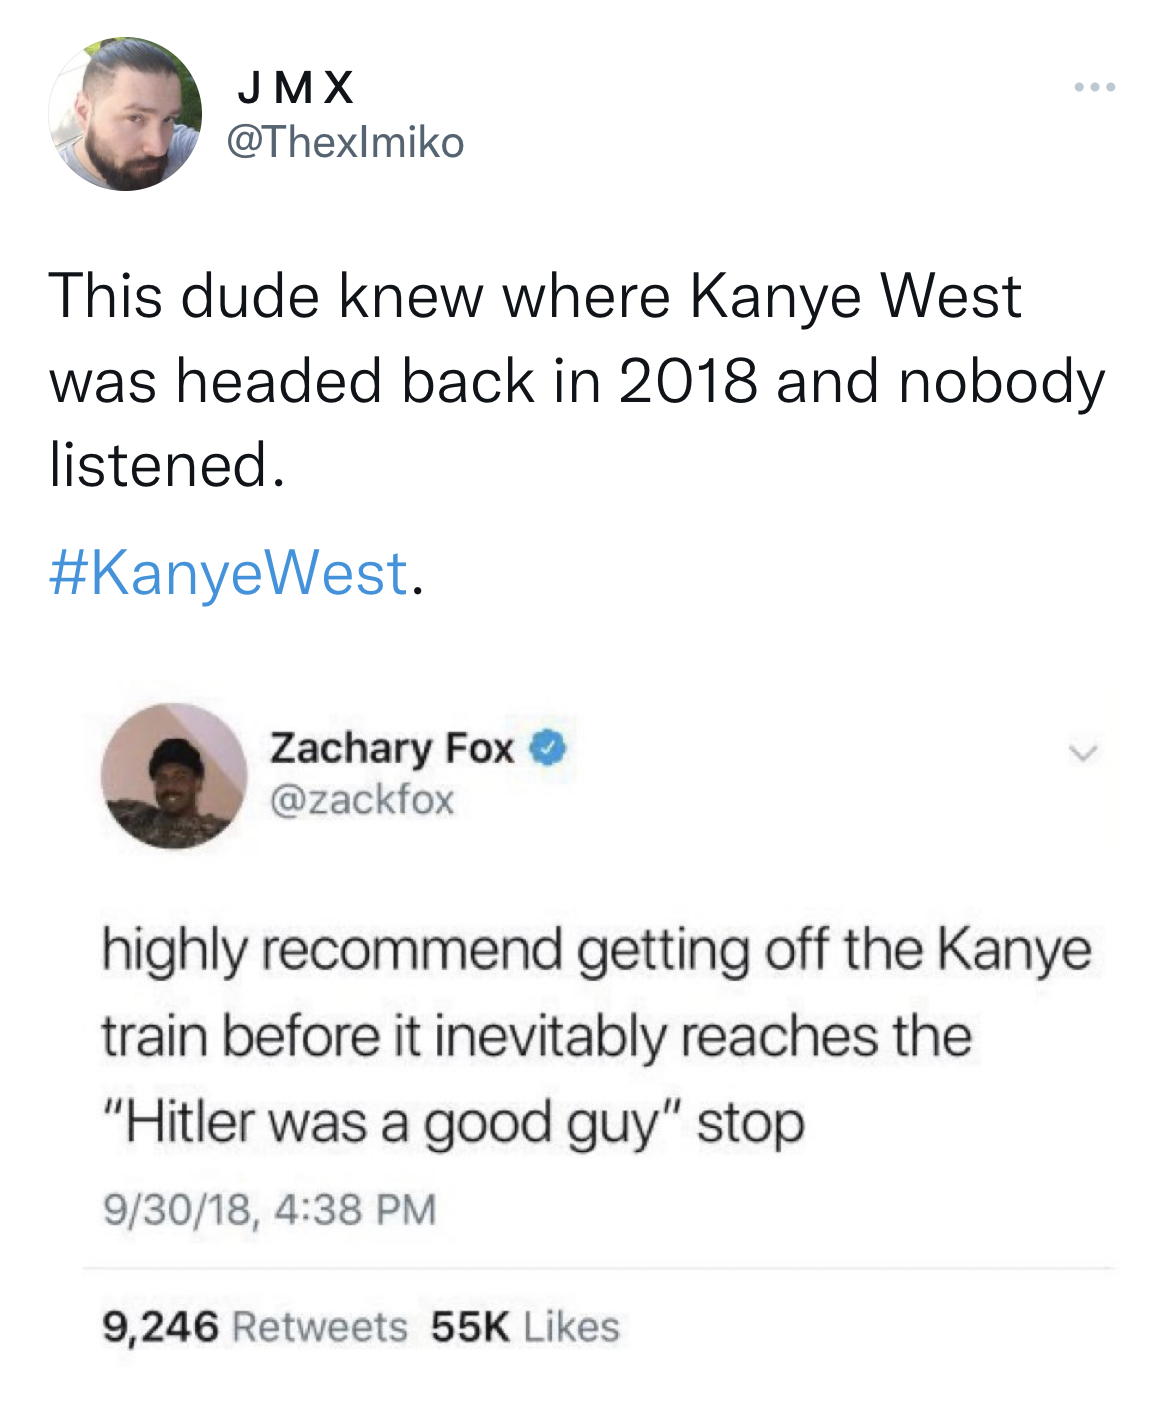 tweets roasting celebs - Jmx This dude knew where Kanye West was headed back in 2018 and nobody listened. . Zachary Fox highly recommend getting off the Kanye train before it inevitably reaches the "Hitler was a good guy" stop 93018, 9,246 55K